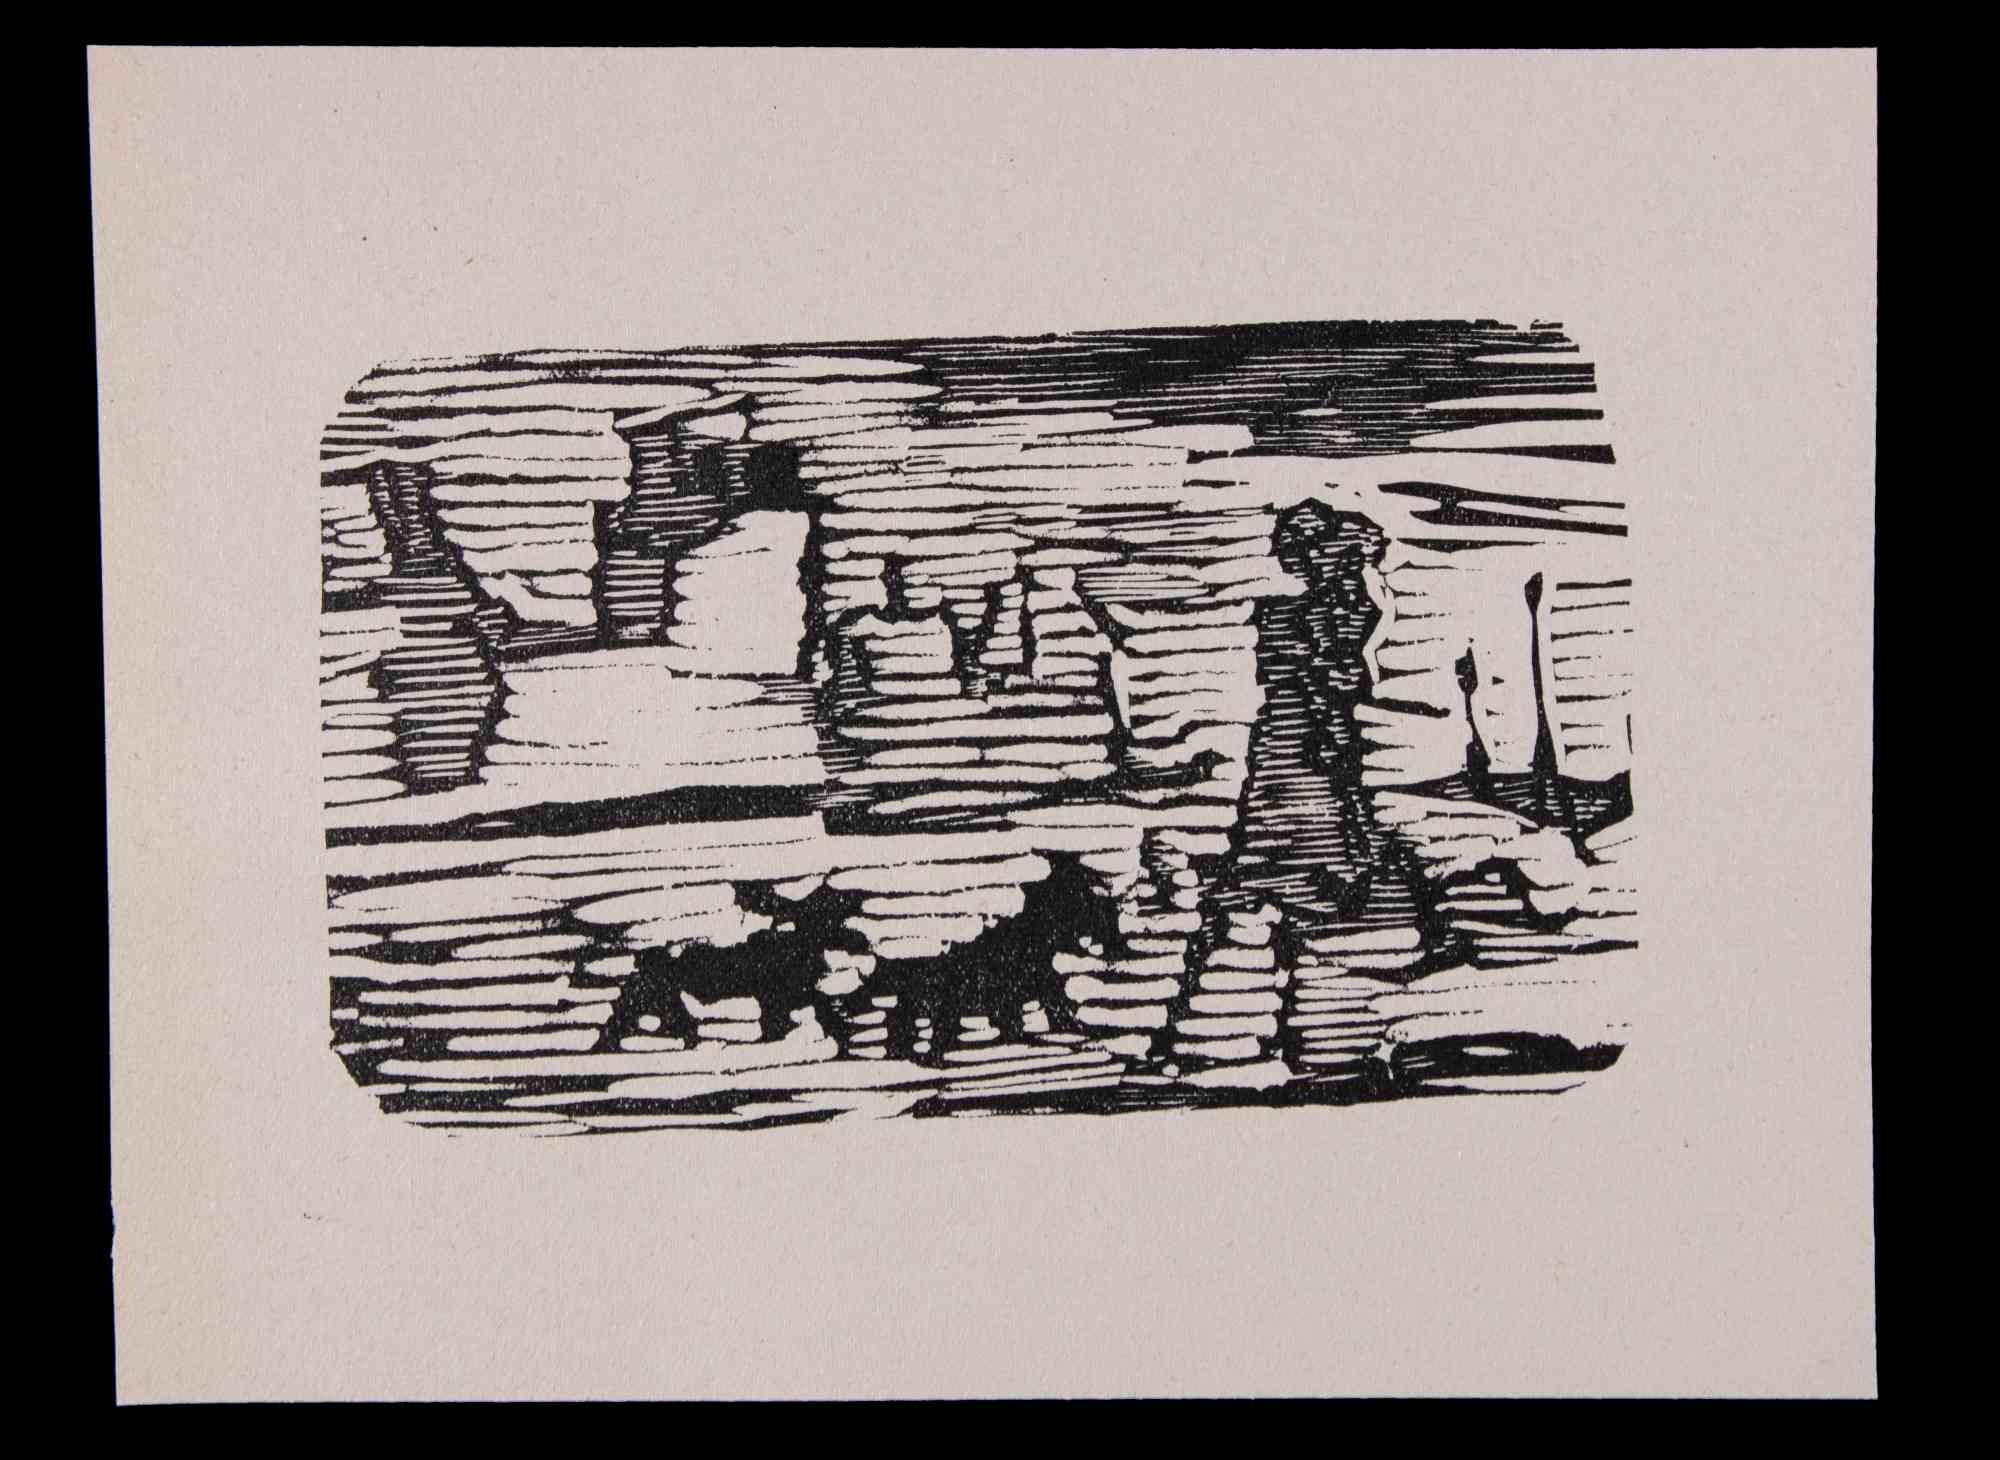 The Walk is an original Linocut Print realized by Mino Maccari in 1951.

Very Good condition.

No Signature.

Mino Maccari (1898-1989) was an Italian writer, painter, engraver and journalist, winner the Feltrinelli Prize for painting on 1963. For